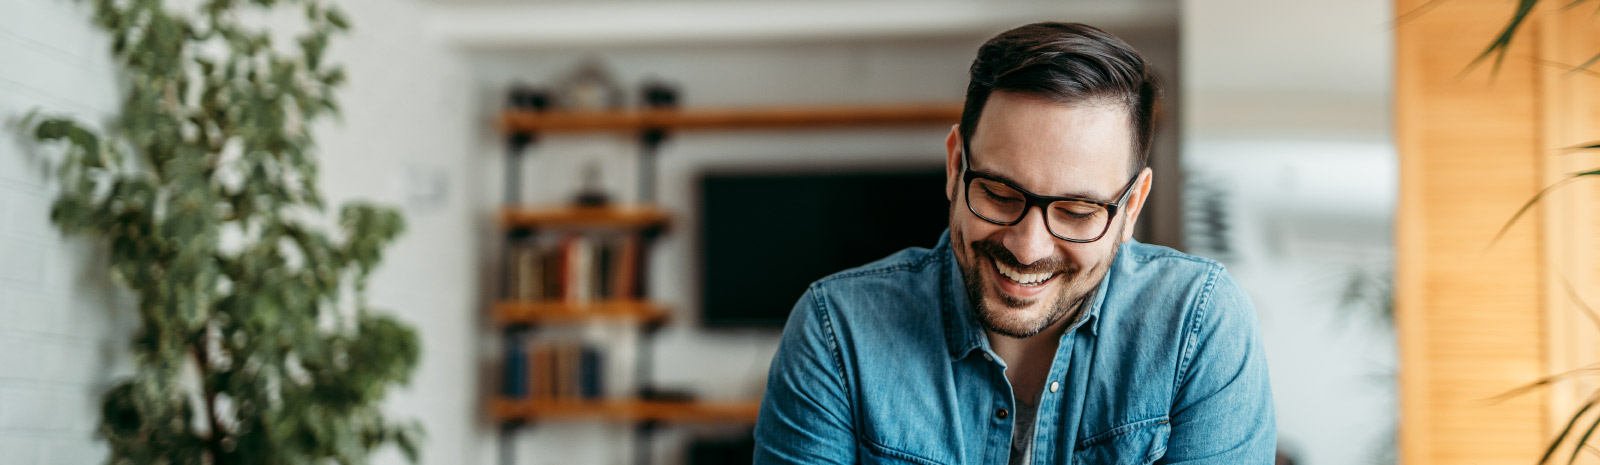 Man in glasses smiling and looking down